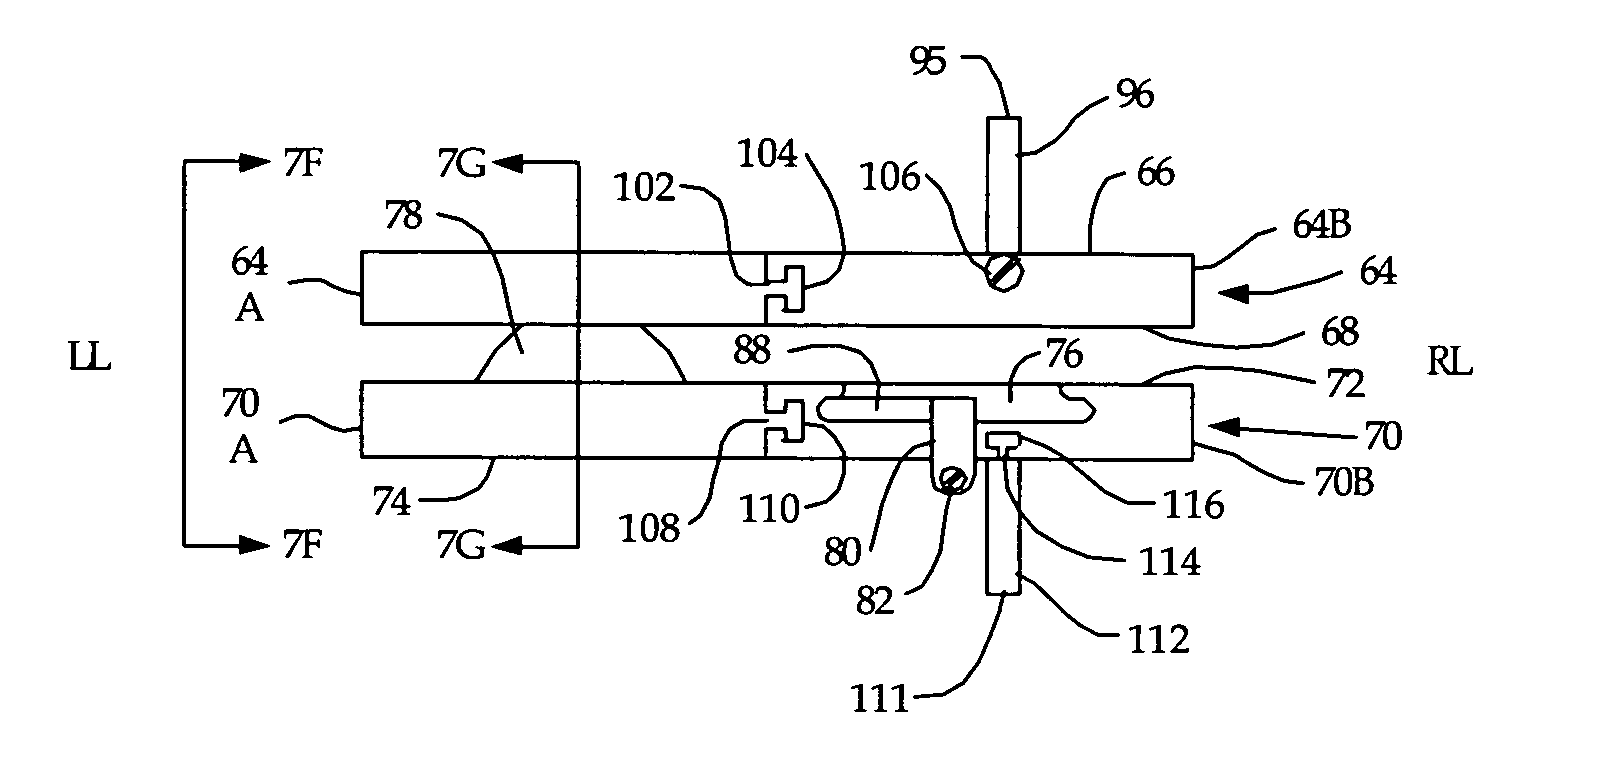 Multi-piece artificial spinal disk replacement device with selectably positioning articulating element